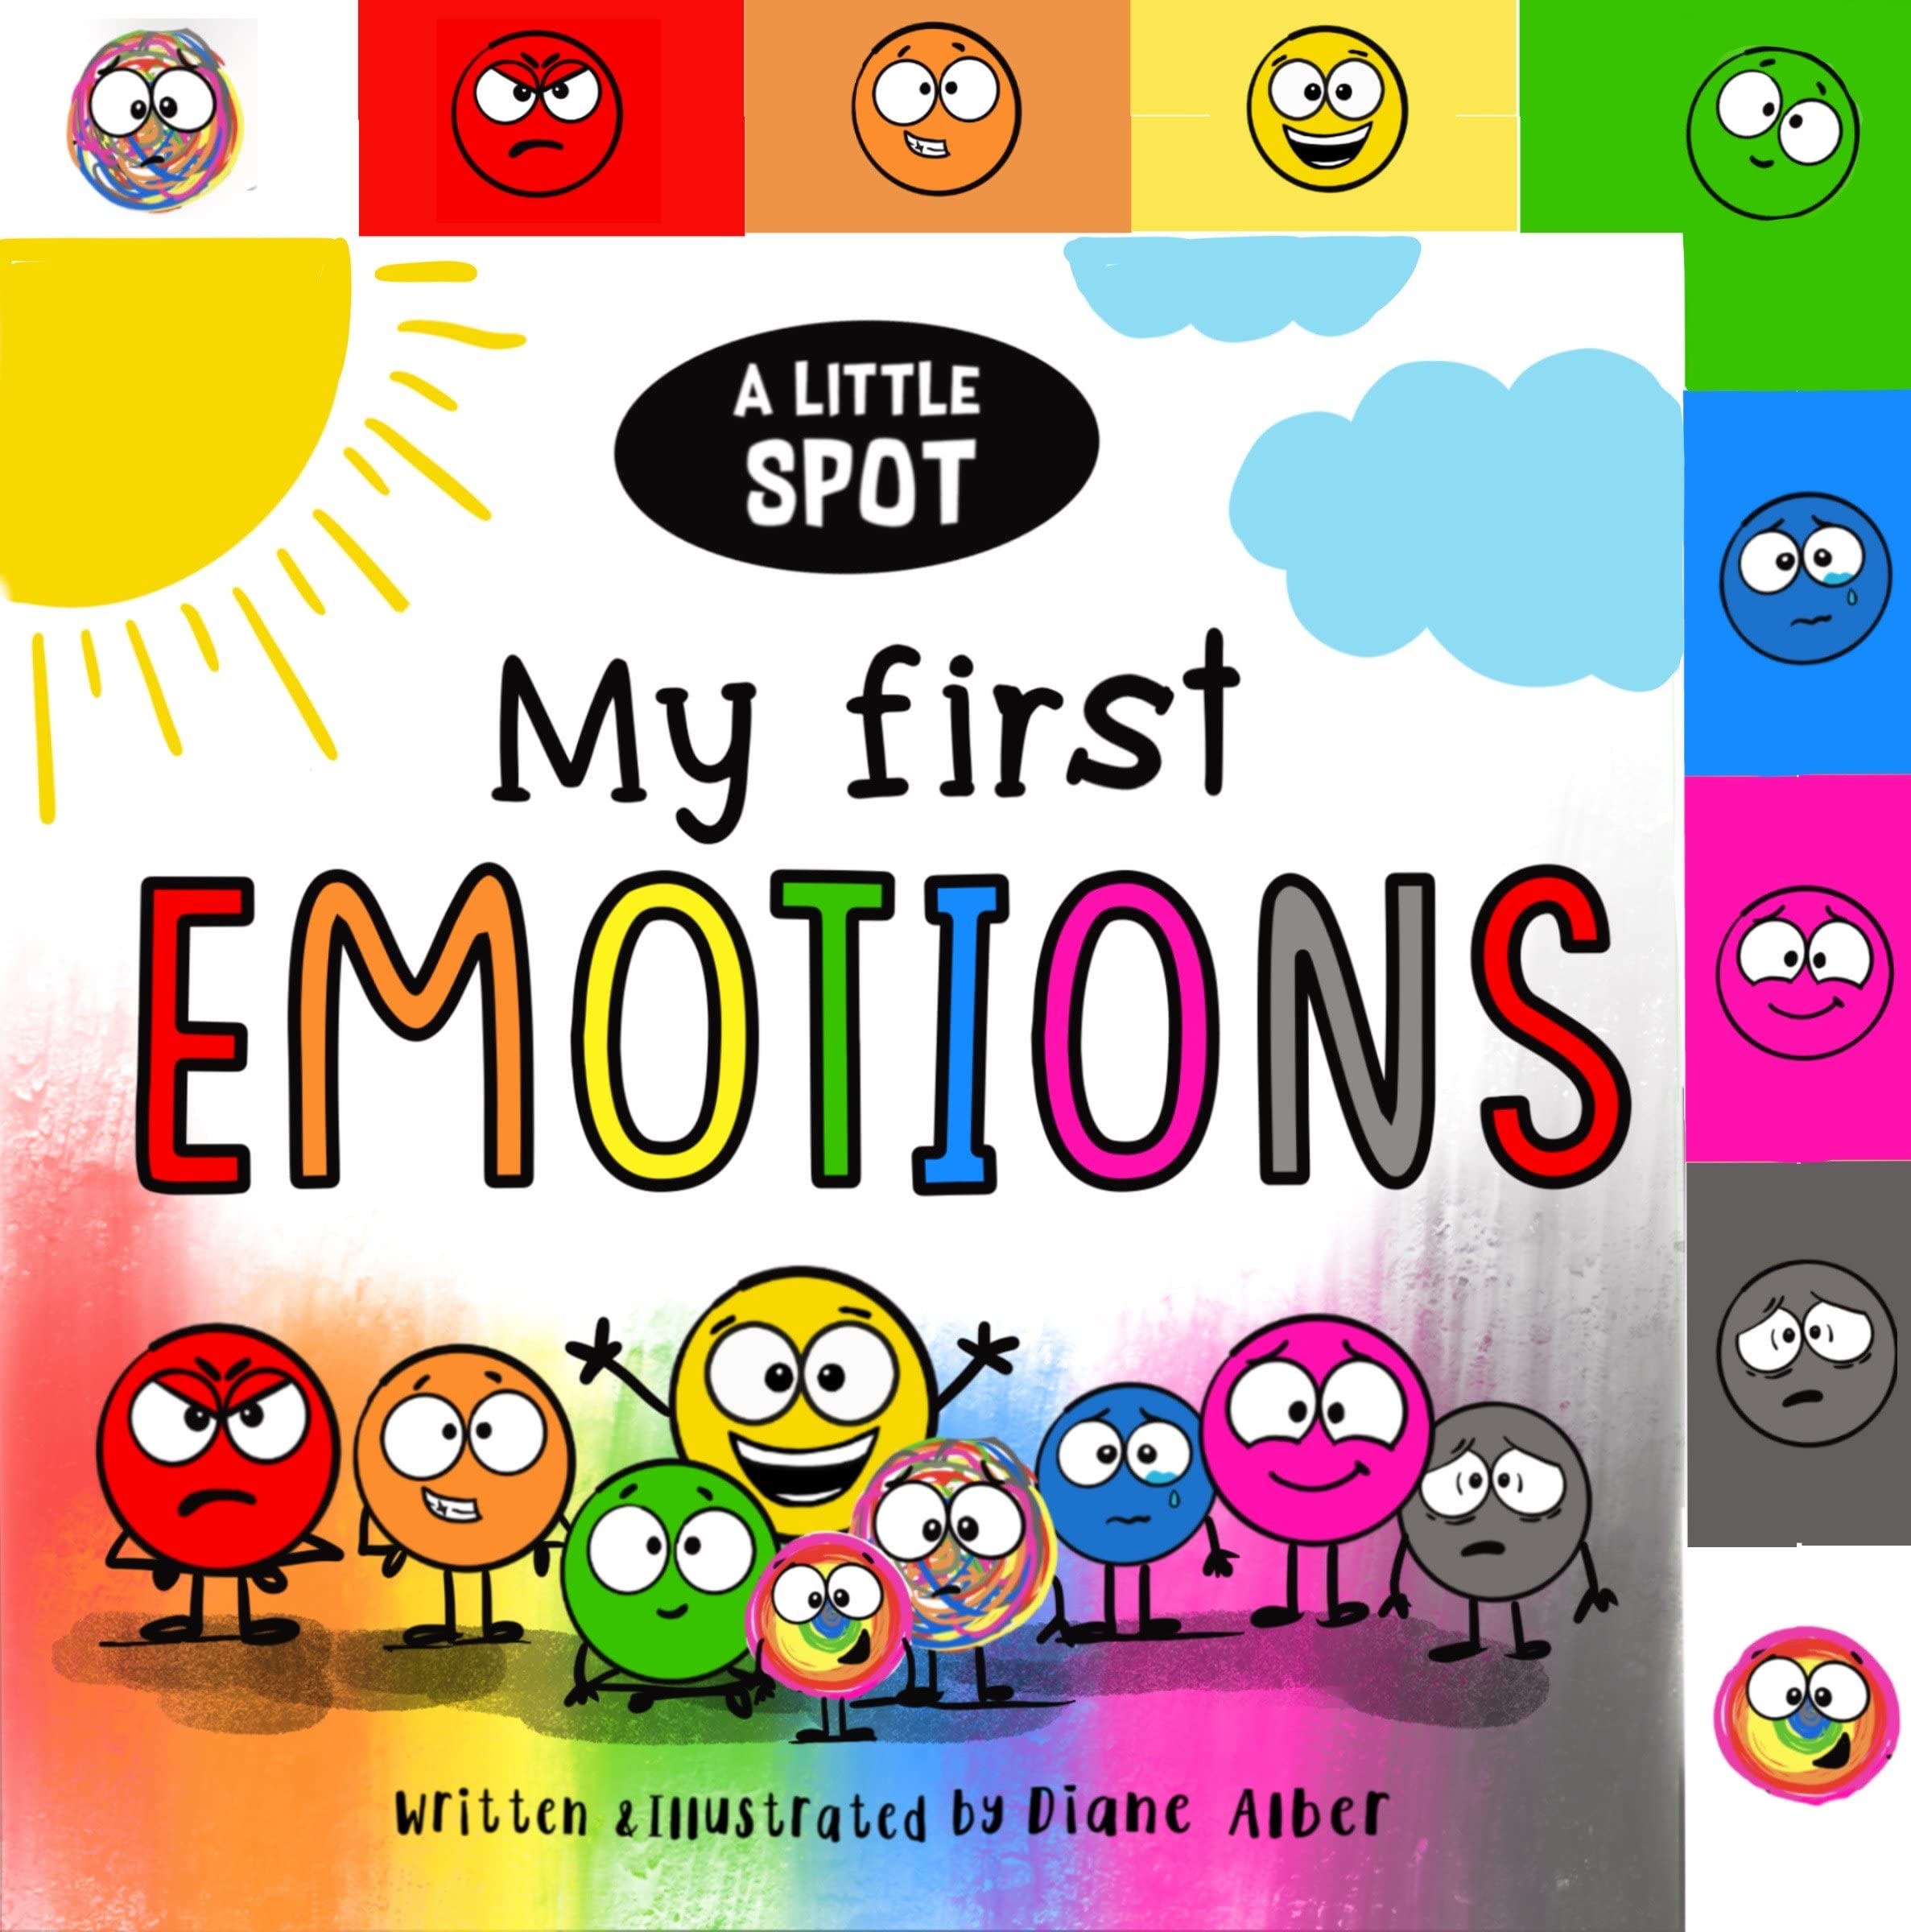 A Little Spot: My First Emotions by Alber, Diane